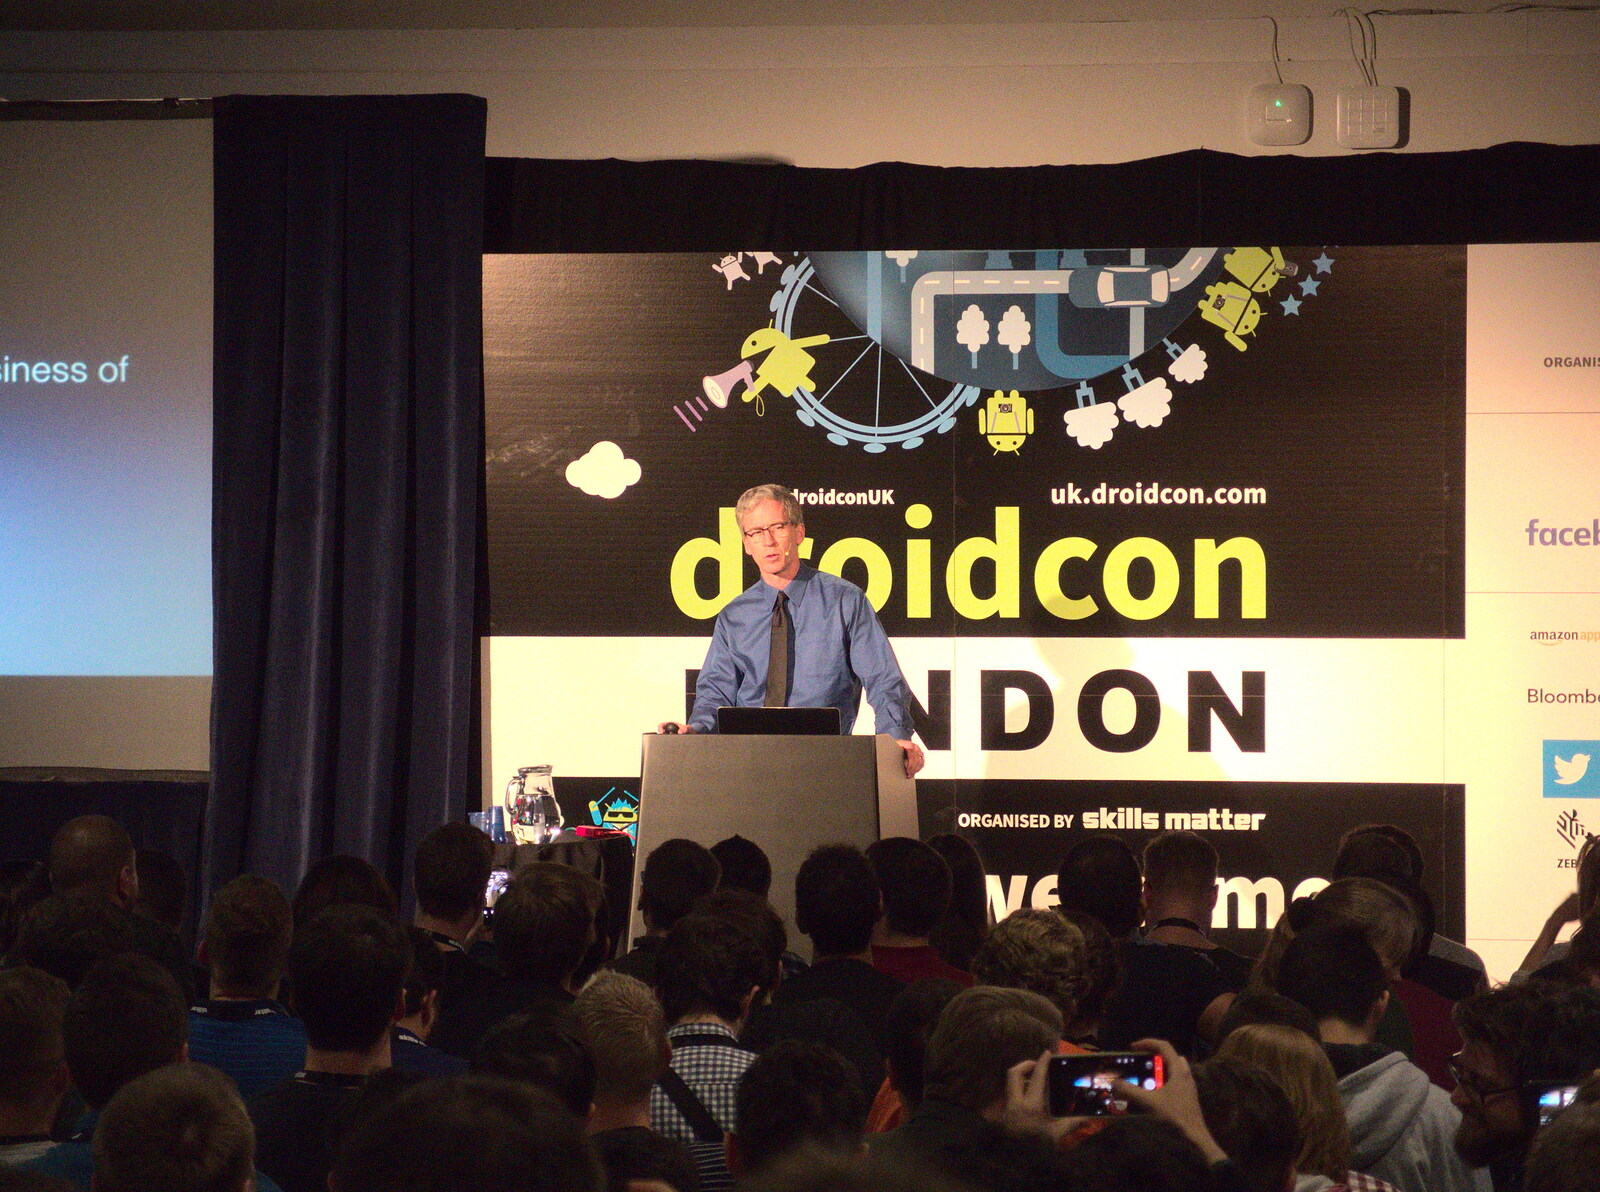 Google's Chet Haase does a presentation from Droidcon 2016, Islington, London - 27th October 2016